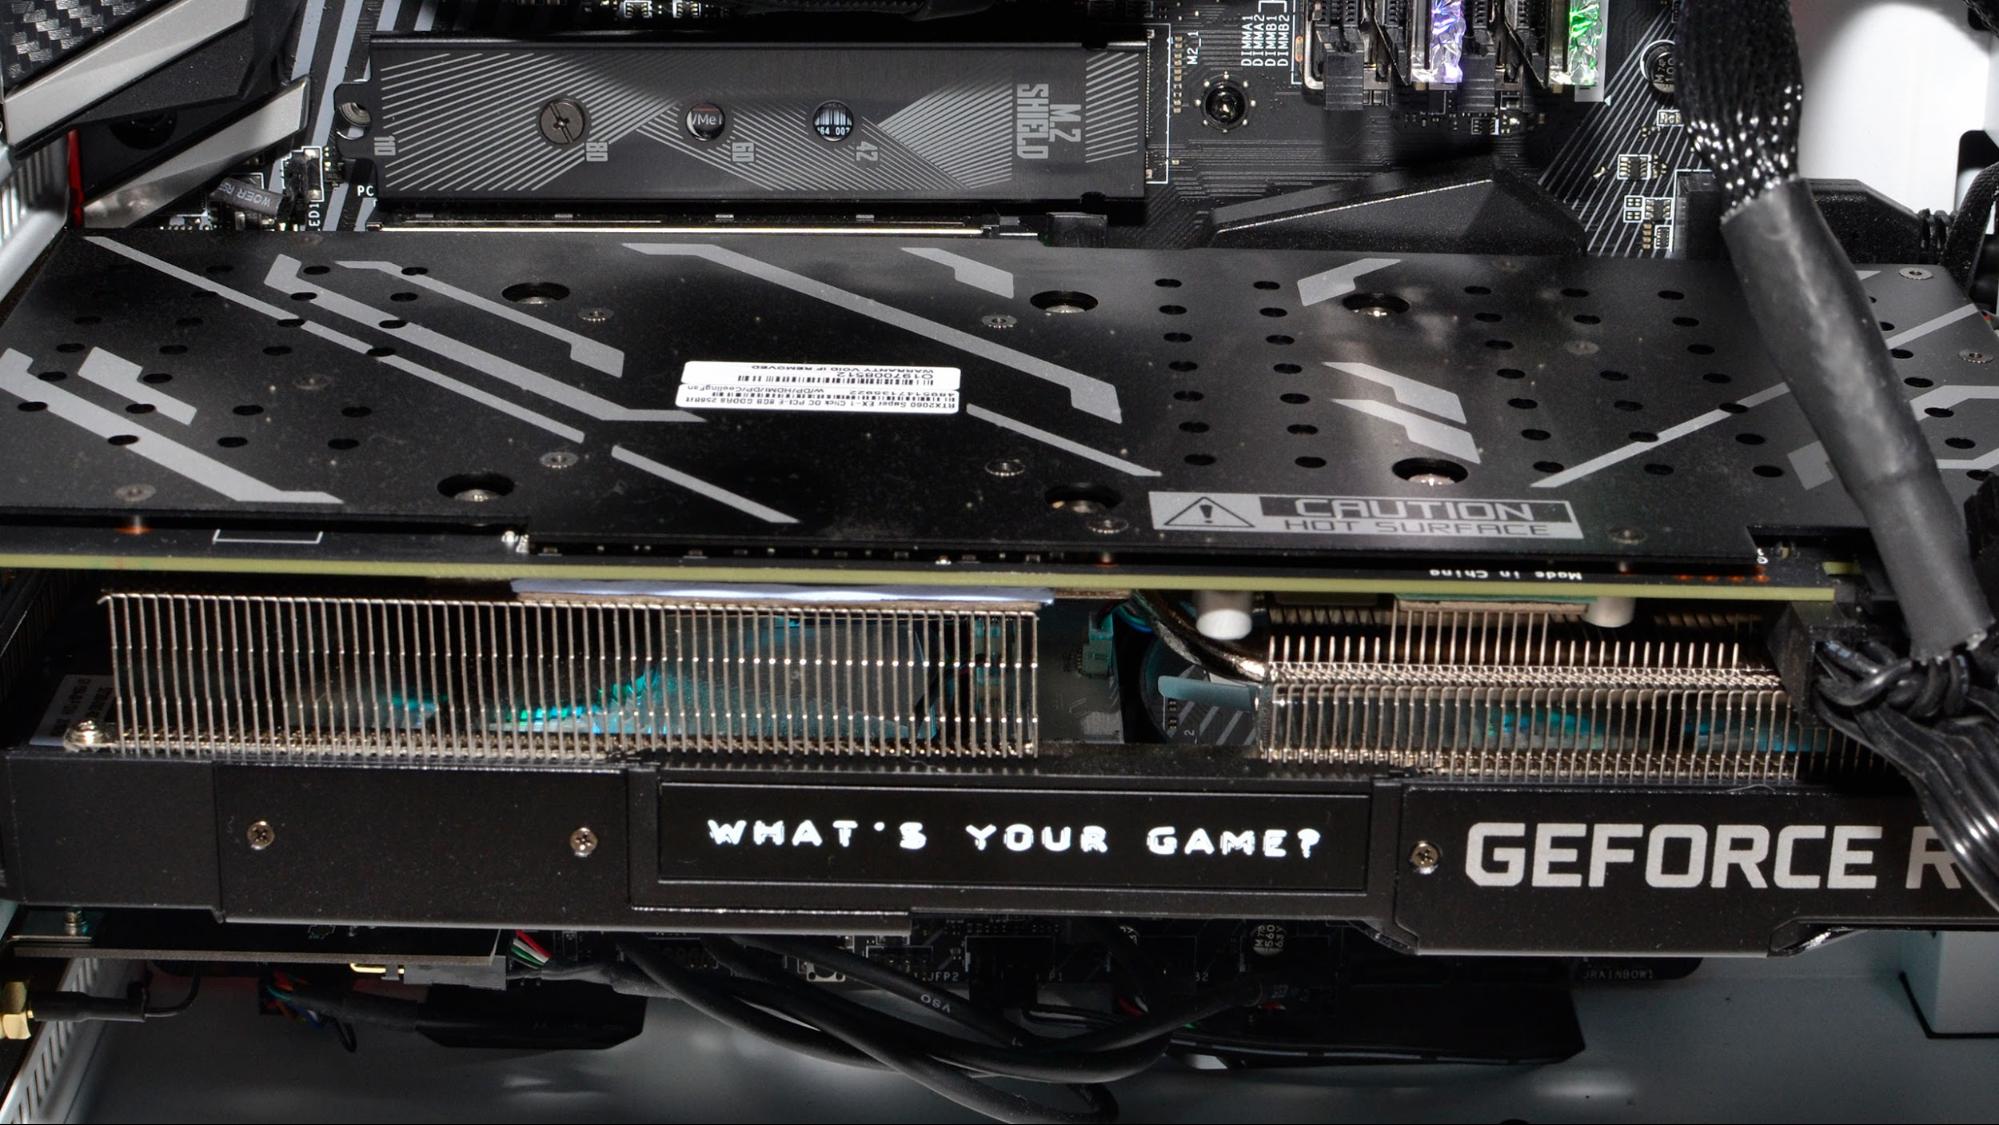 middag elegant vervagen What Graphics Cards Are Compatible With My PC? | Tom's Hardware